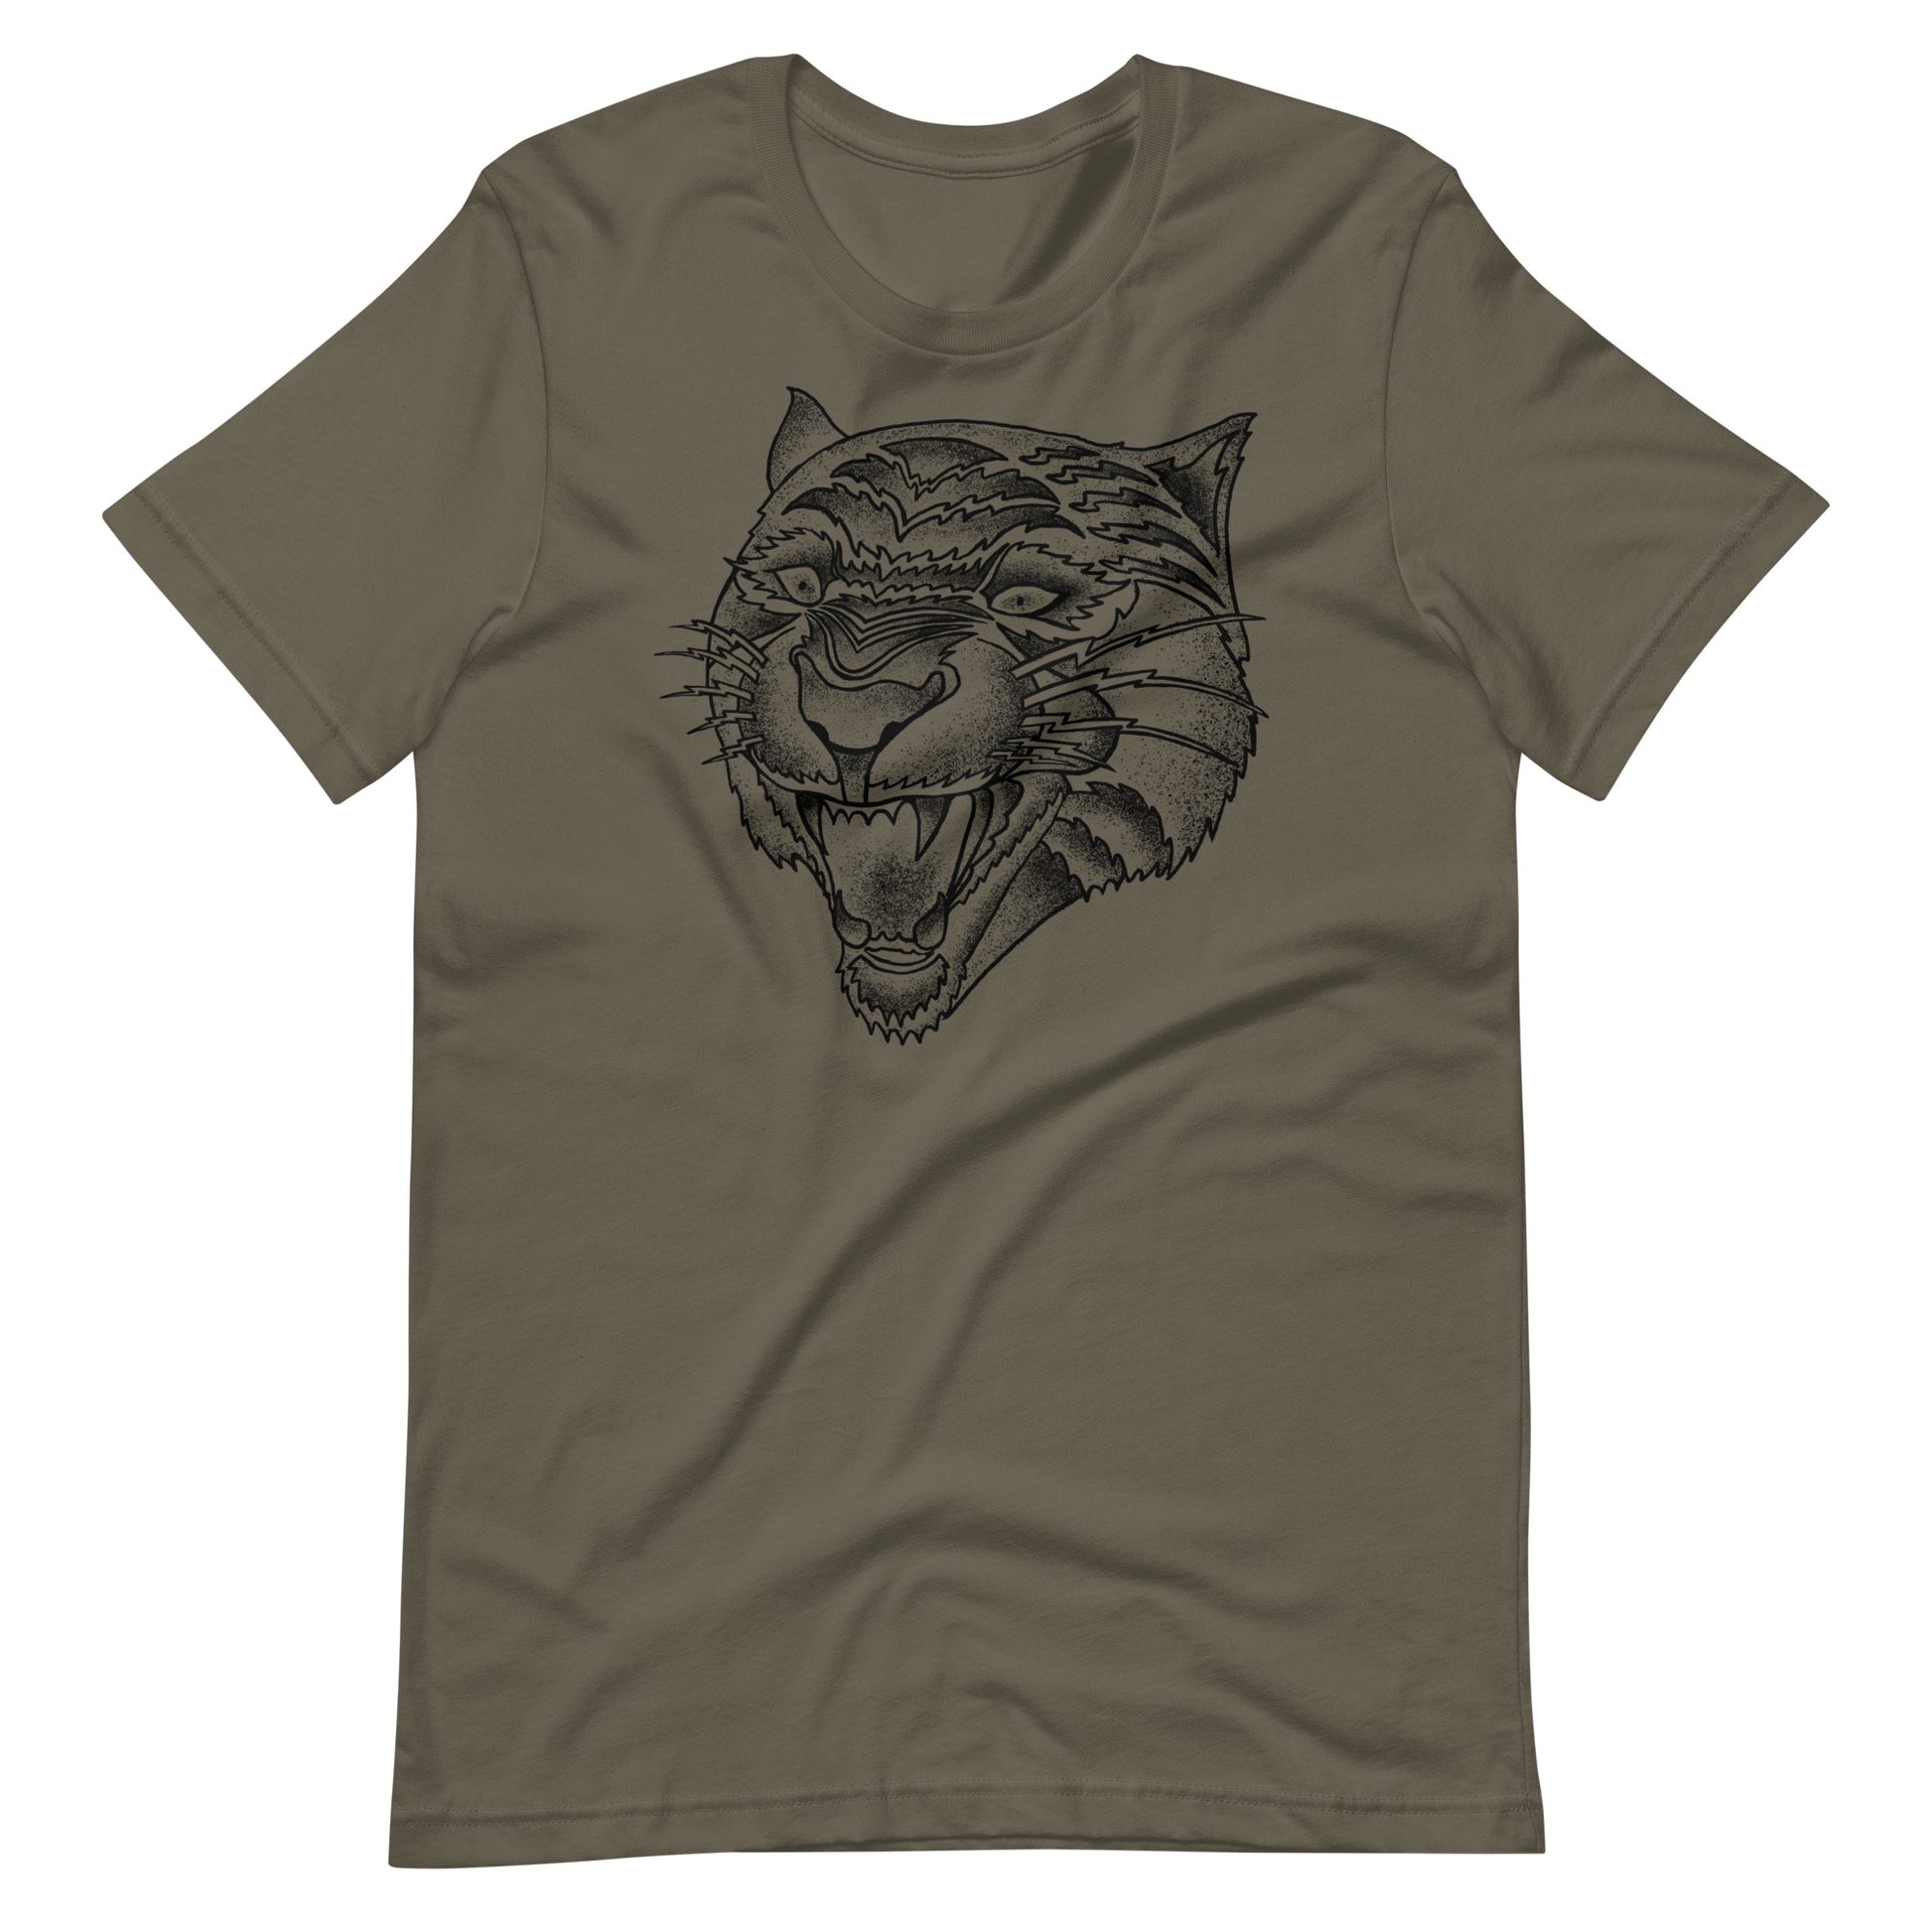 Panther Black - Men's t-shirt - Army Front